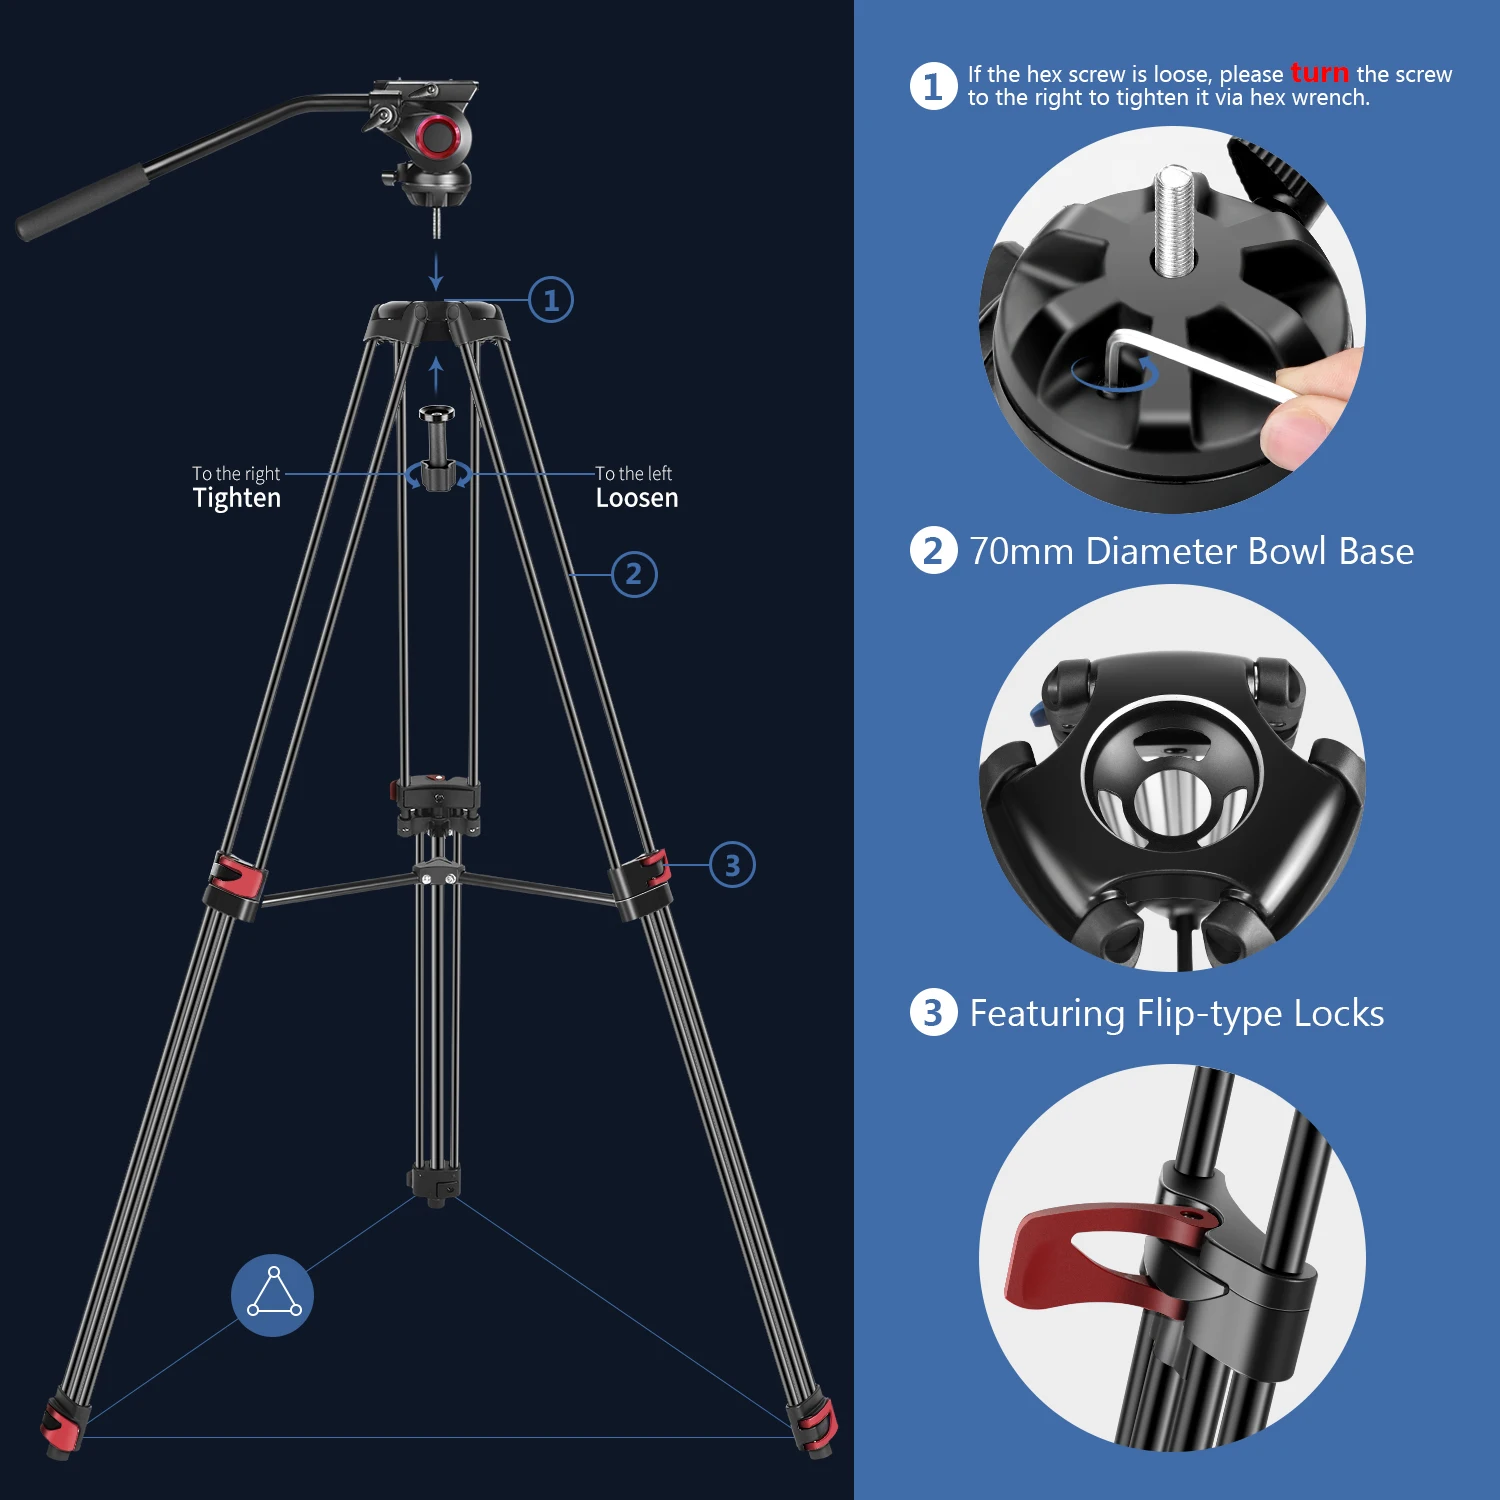 Neewer Professional Heavy Duty Video Camera Tripod,64 inches/163 centimeters Aluminum Alloy with 360 Degree Fluid Drag Head,1/4 and 3/8-inch Quick Shoe Plate,Bag,Load up to 17.6 pounds/8 kilograms 